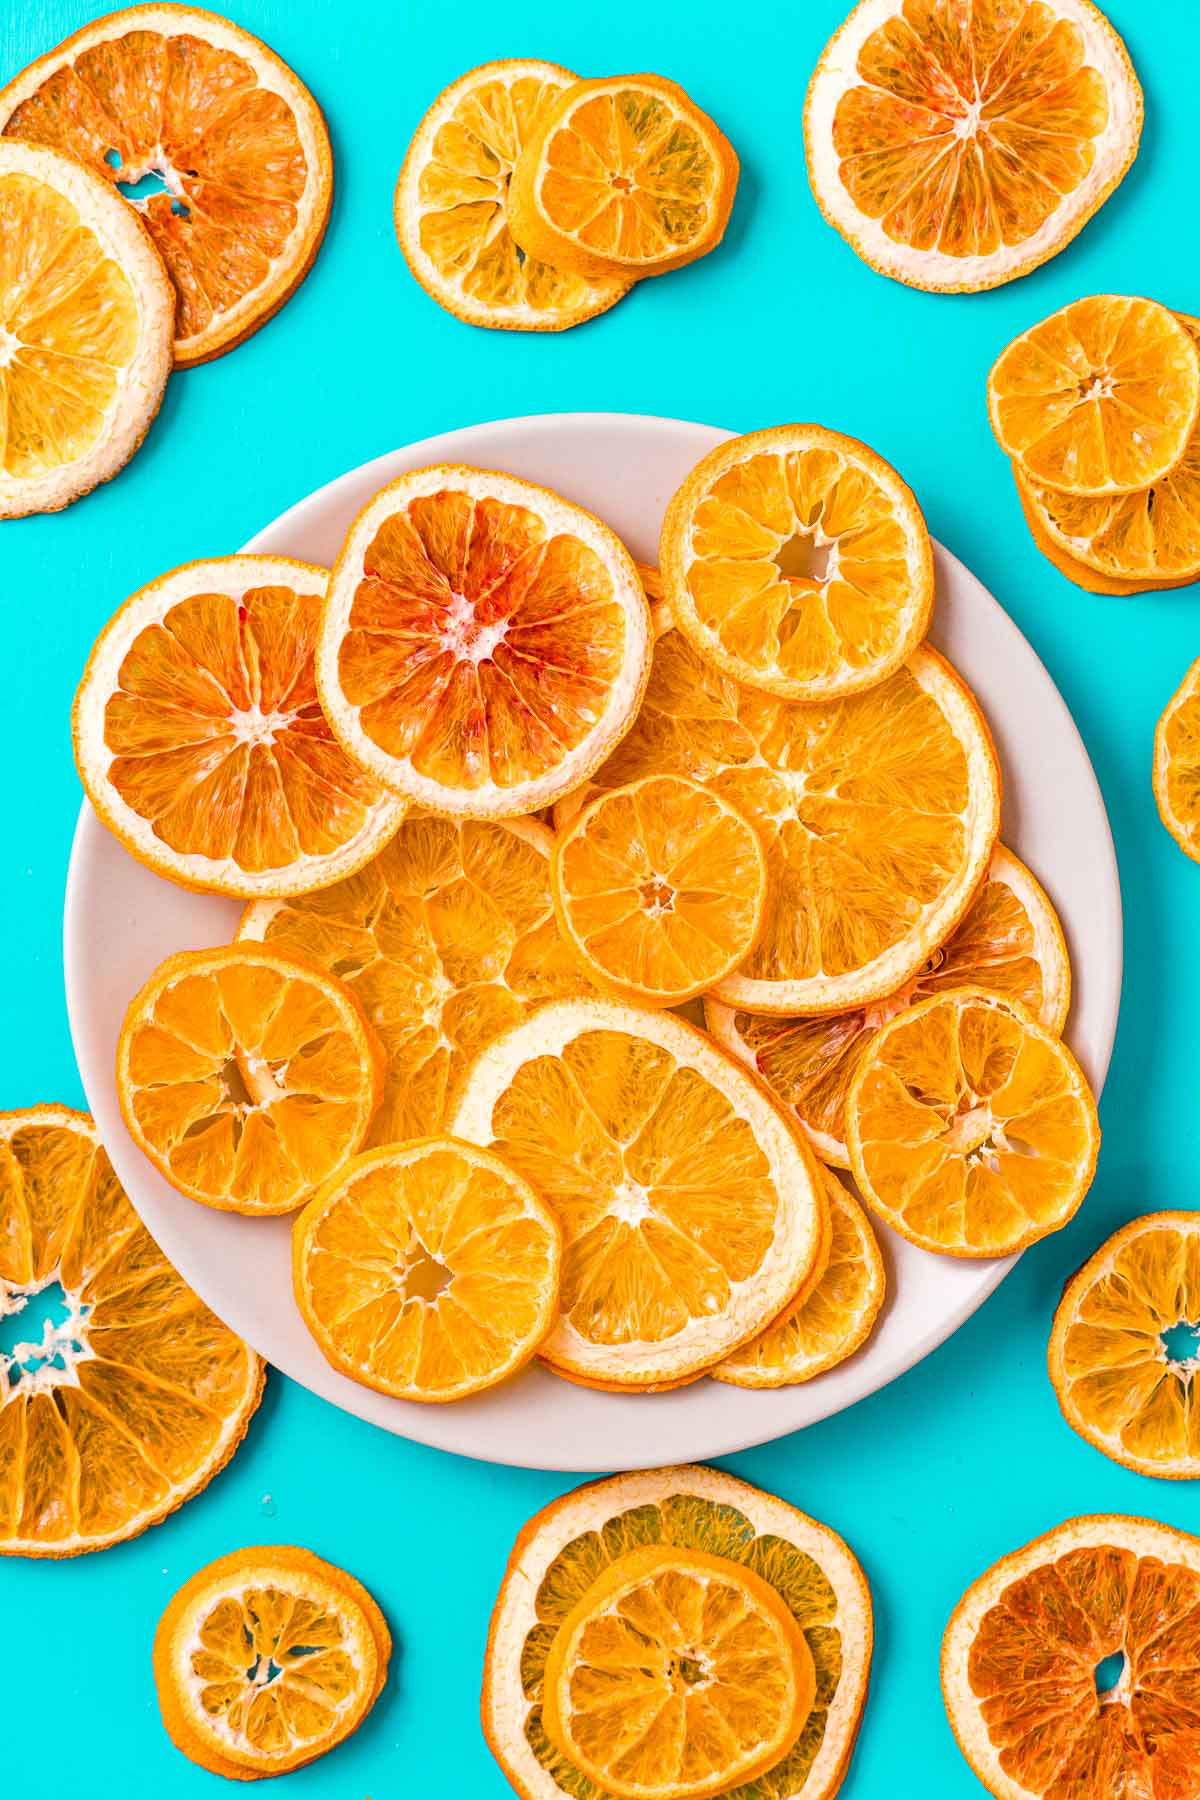 Dried orange slices on a plate surrounded by dehydrated orange slices.